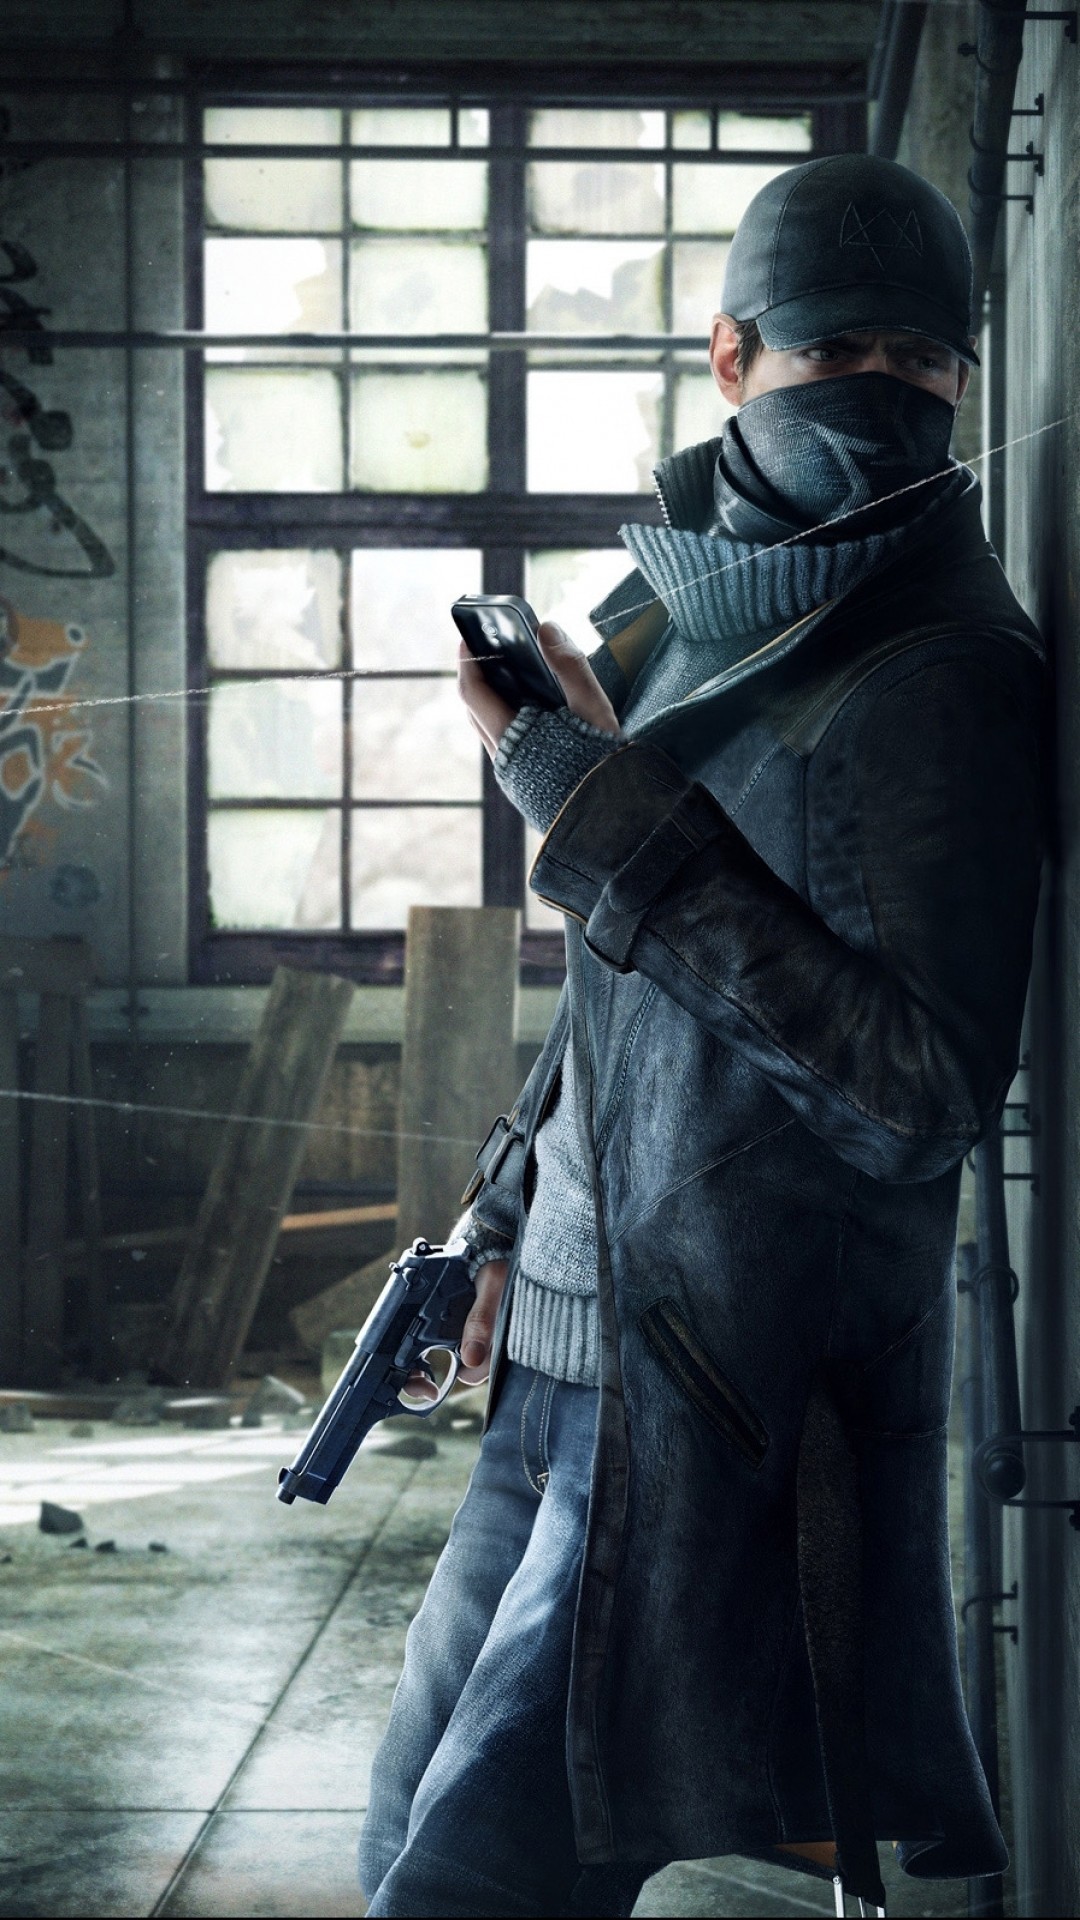 Watch Dogs – Apple / iPhone 6 Plus – 23 Wallpapers